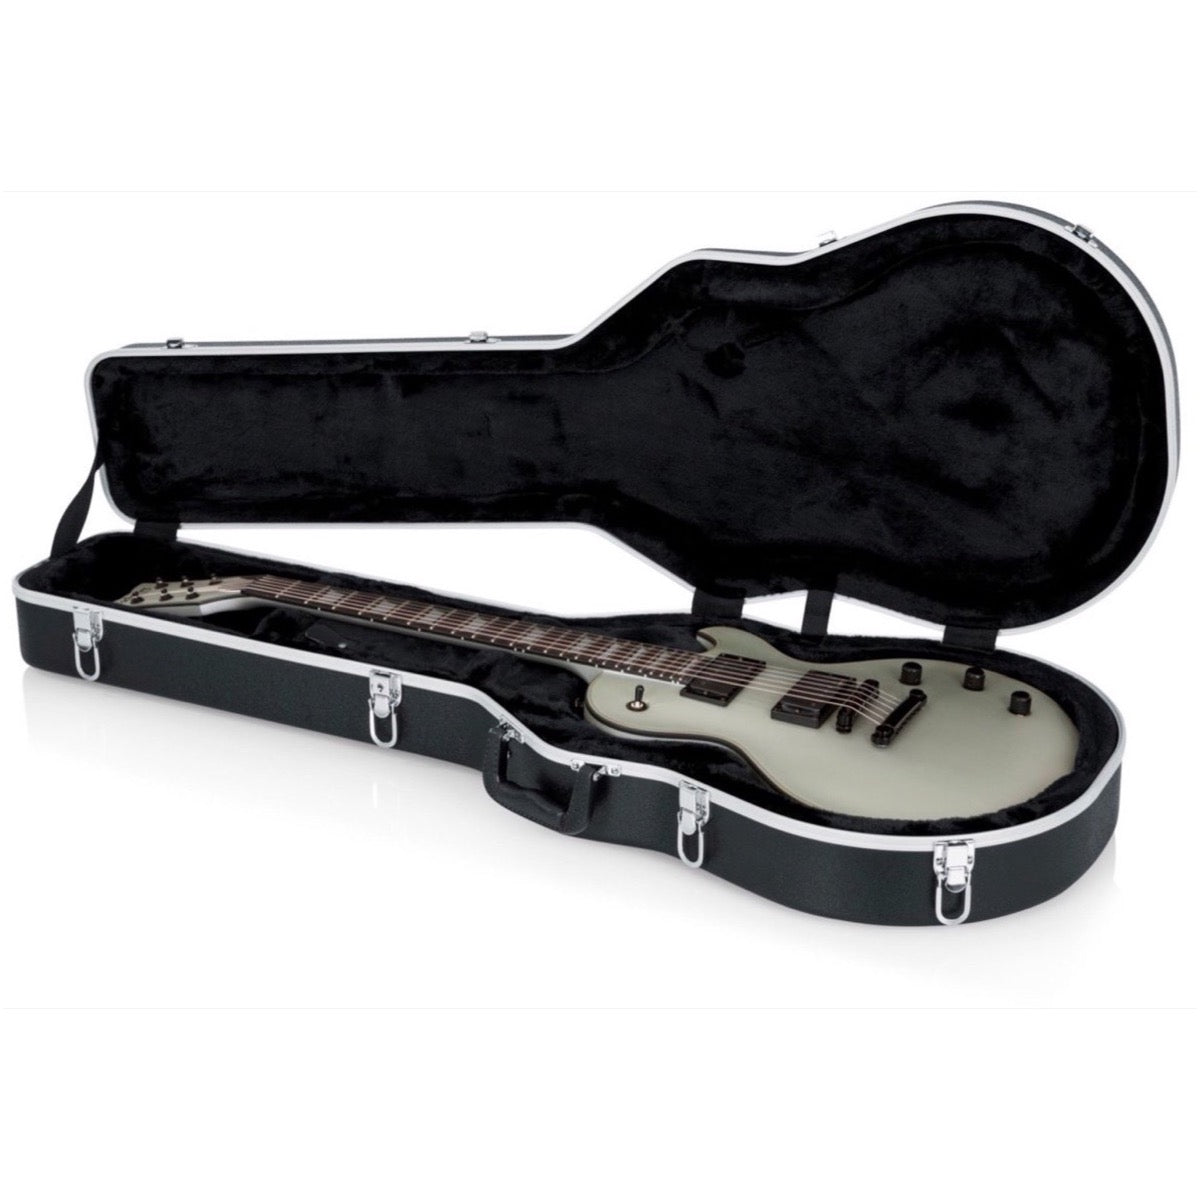 Gator GCLPS Deluxe Molded Case for Gibson or Epiphone Les Paul Guitars